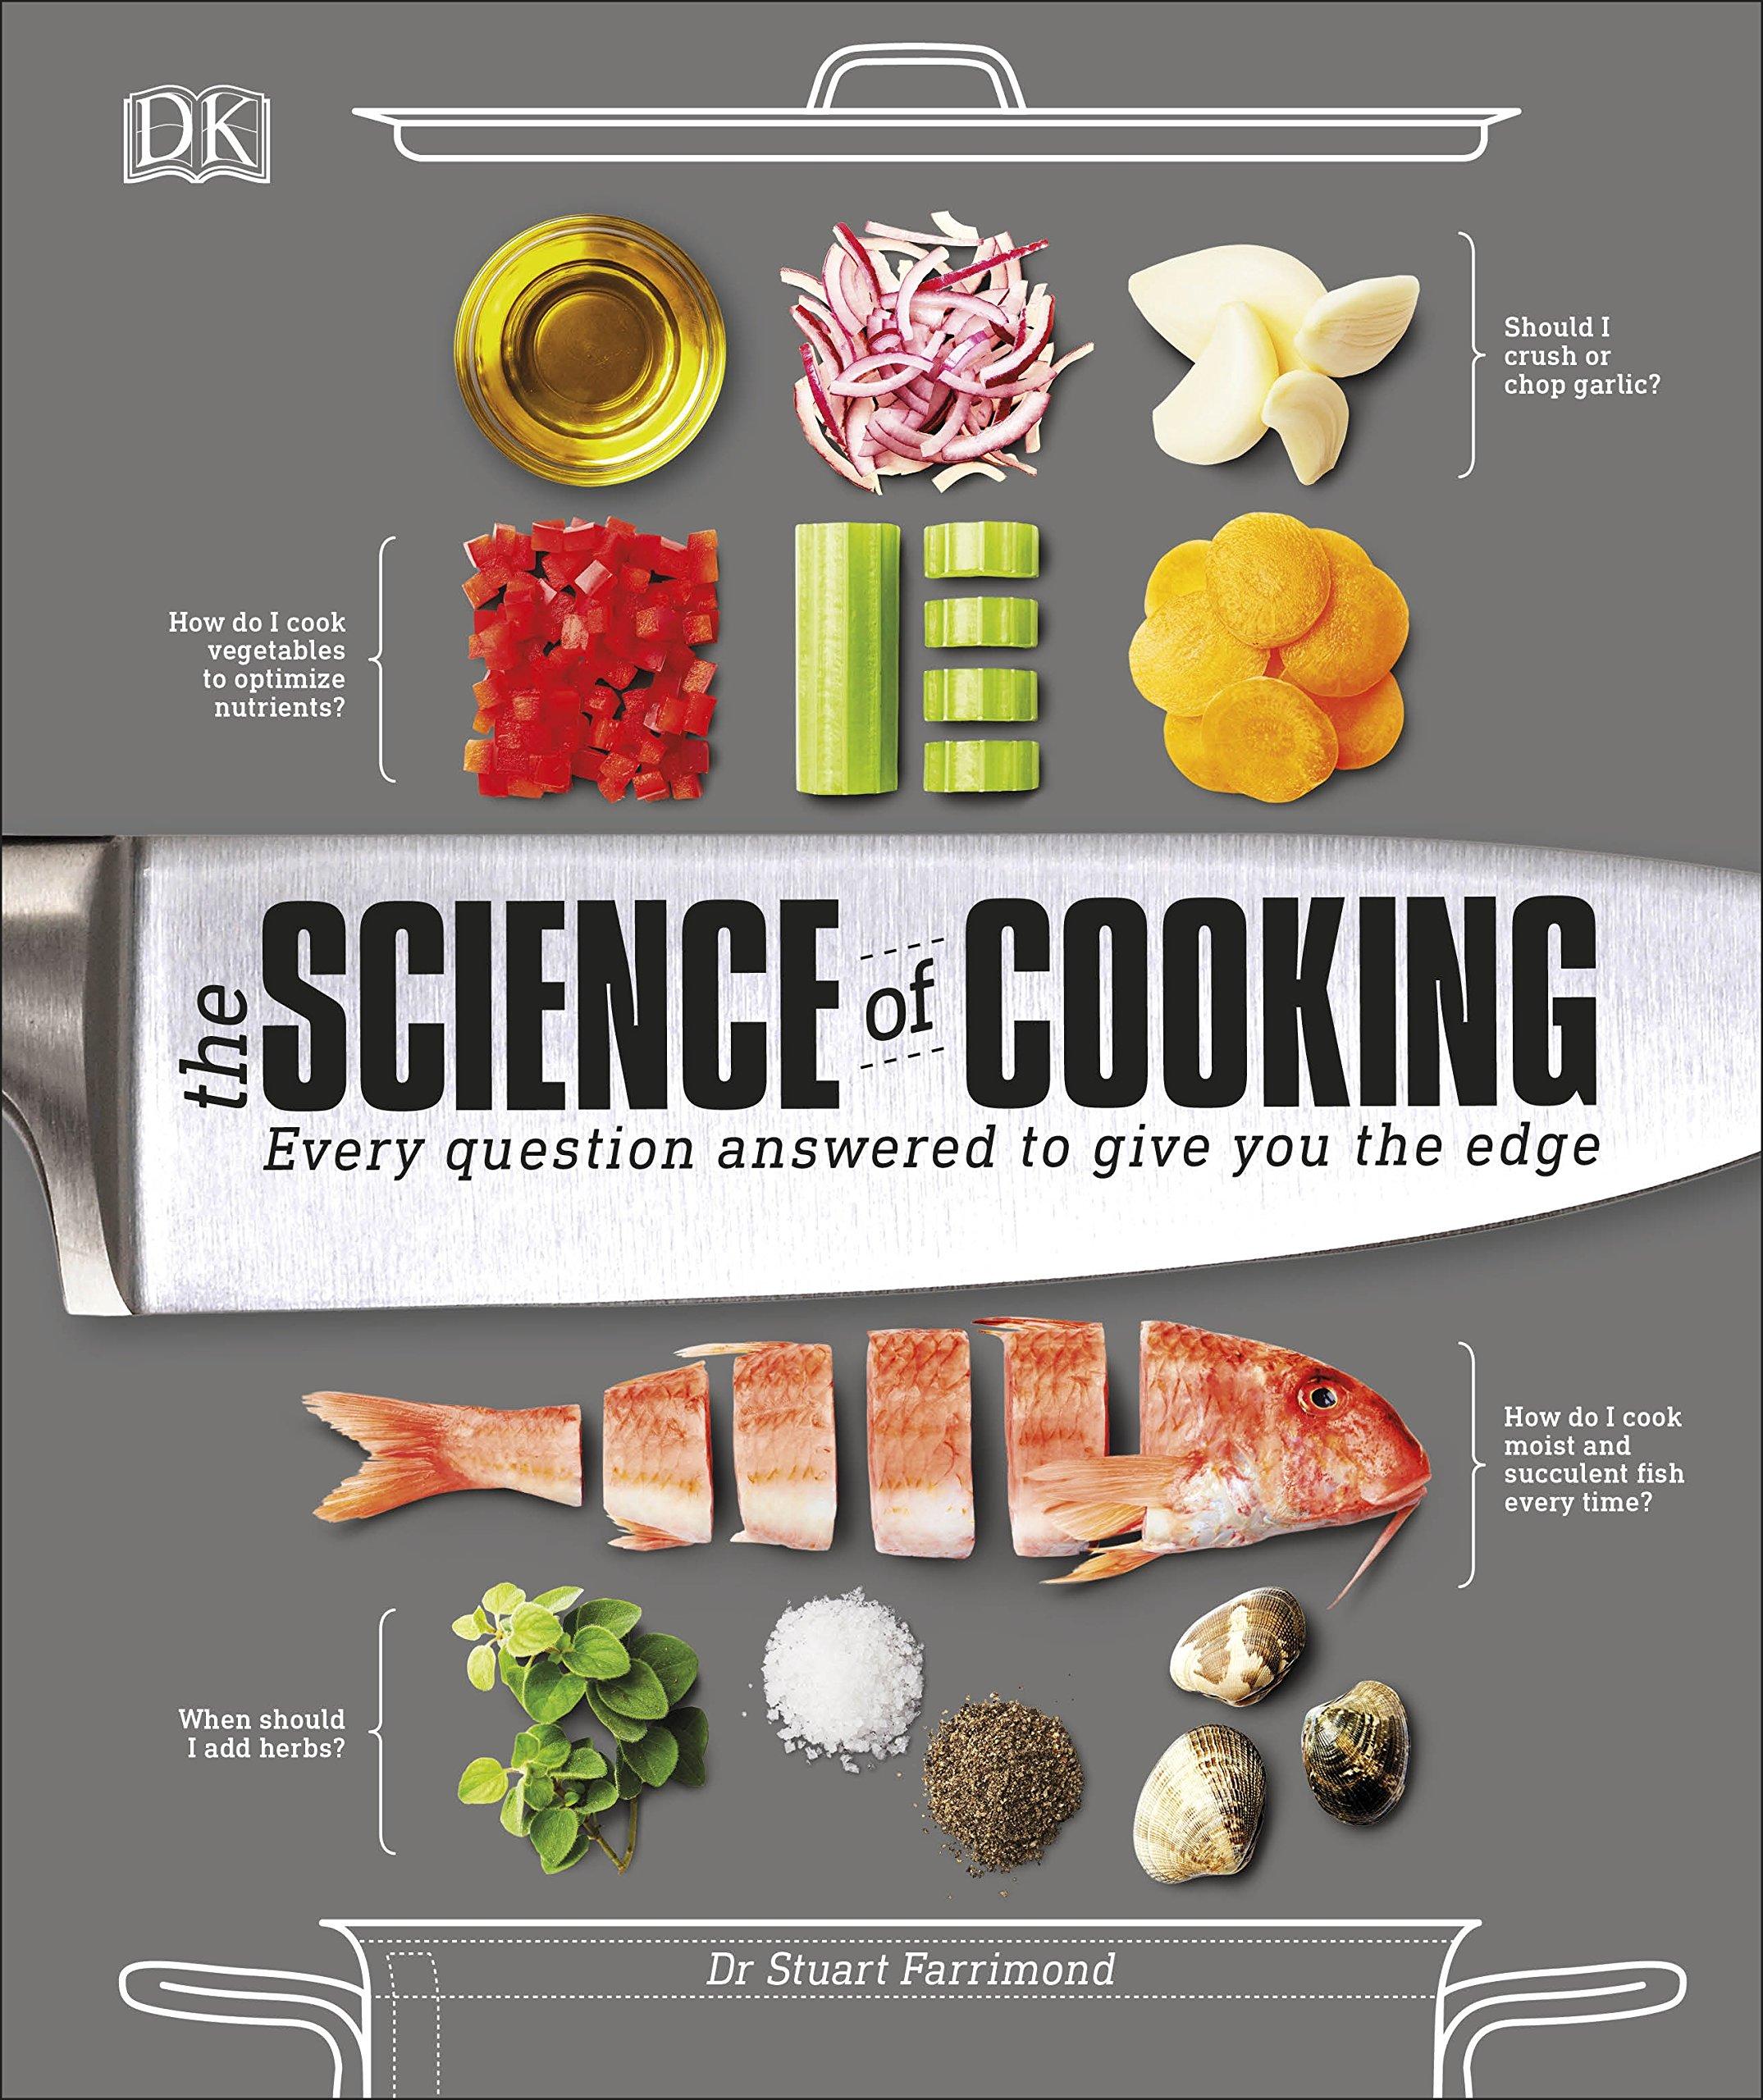 Cooking,nutrition & Food